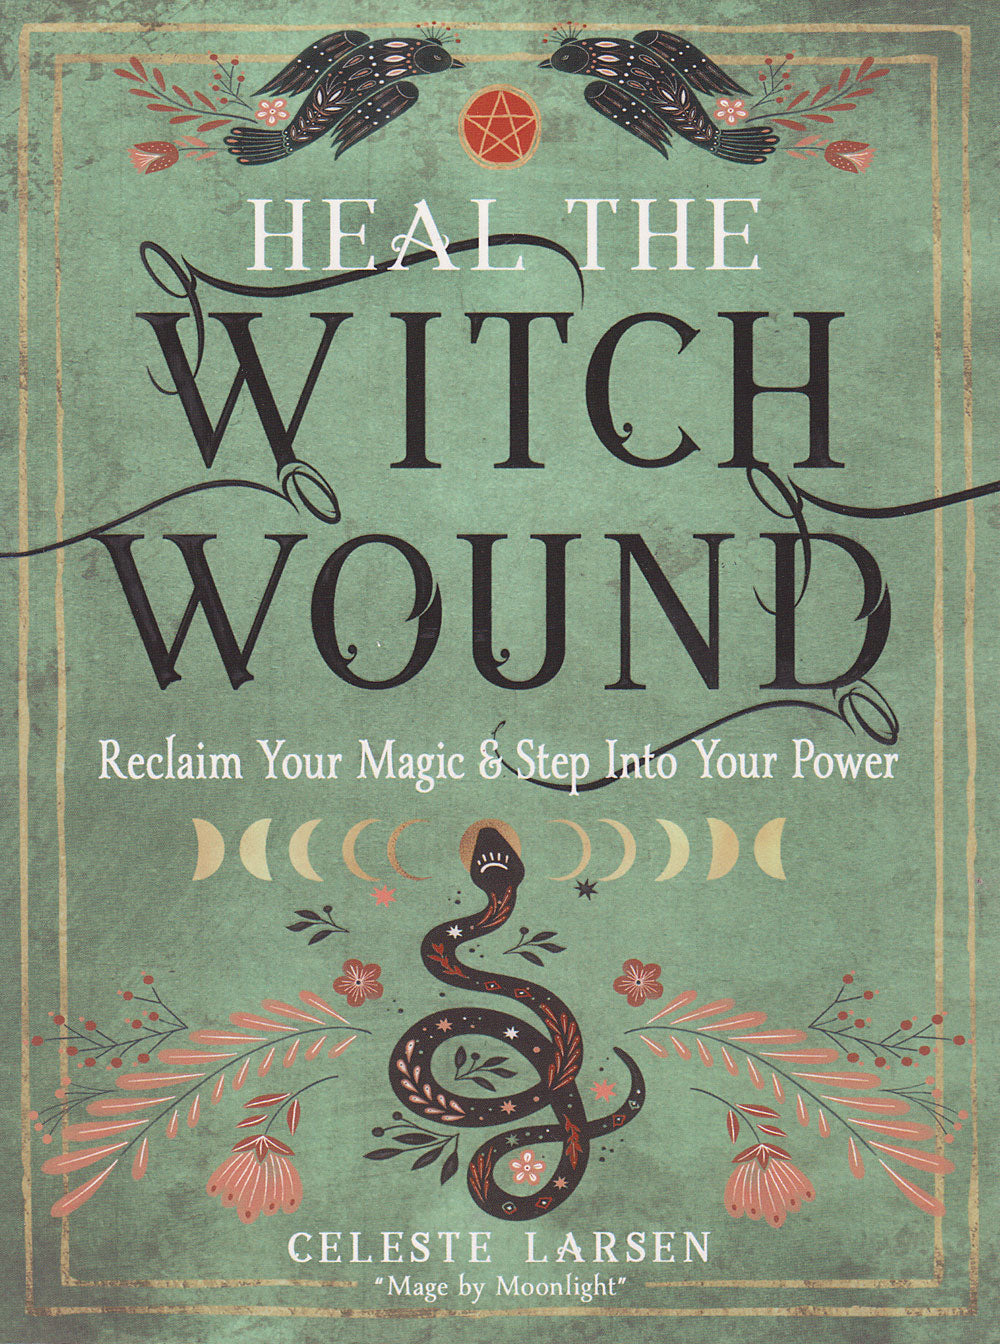 Heal the Witch Wound